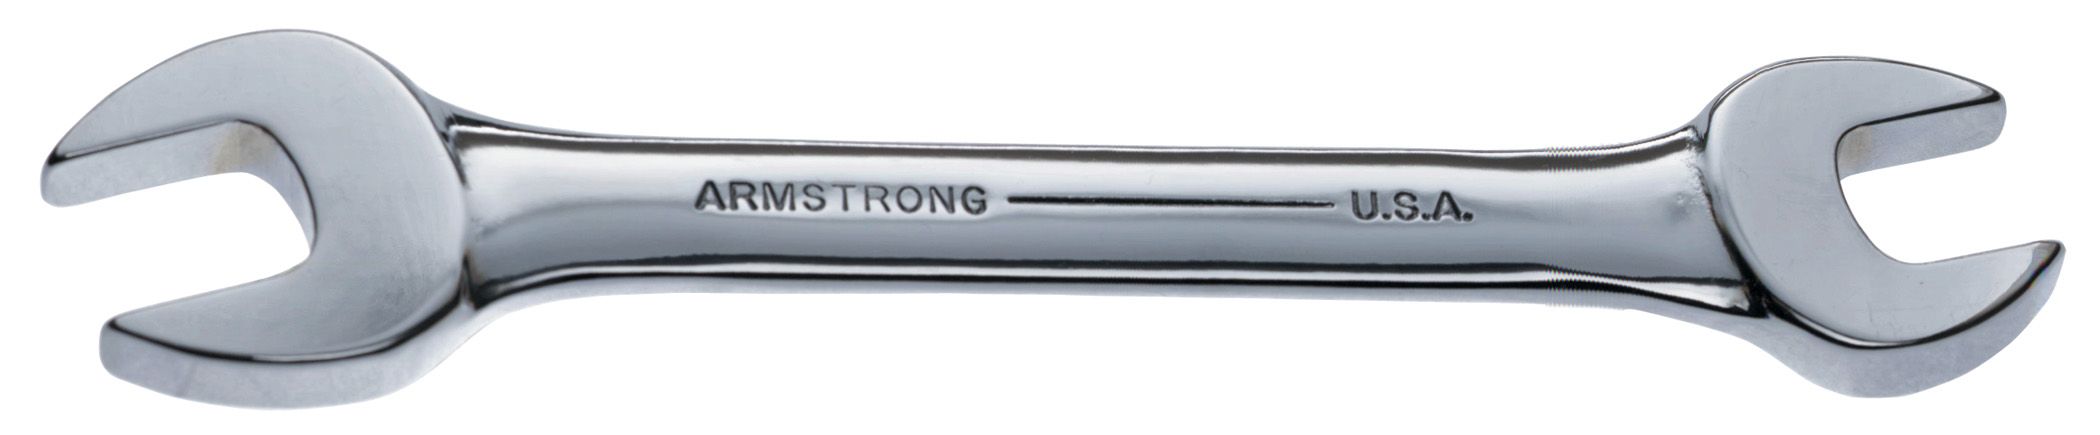 Armstrong 1-1/8 x 1-1/4 Full Polish Open End Wrench